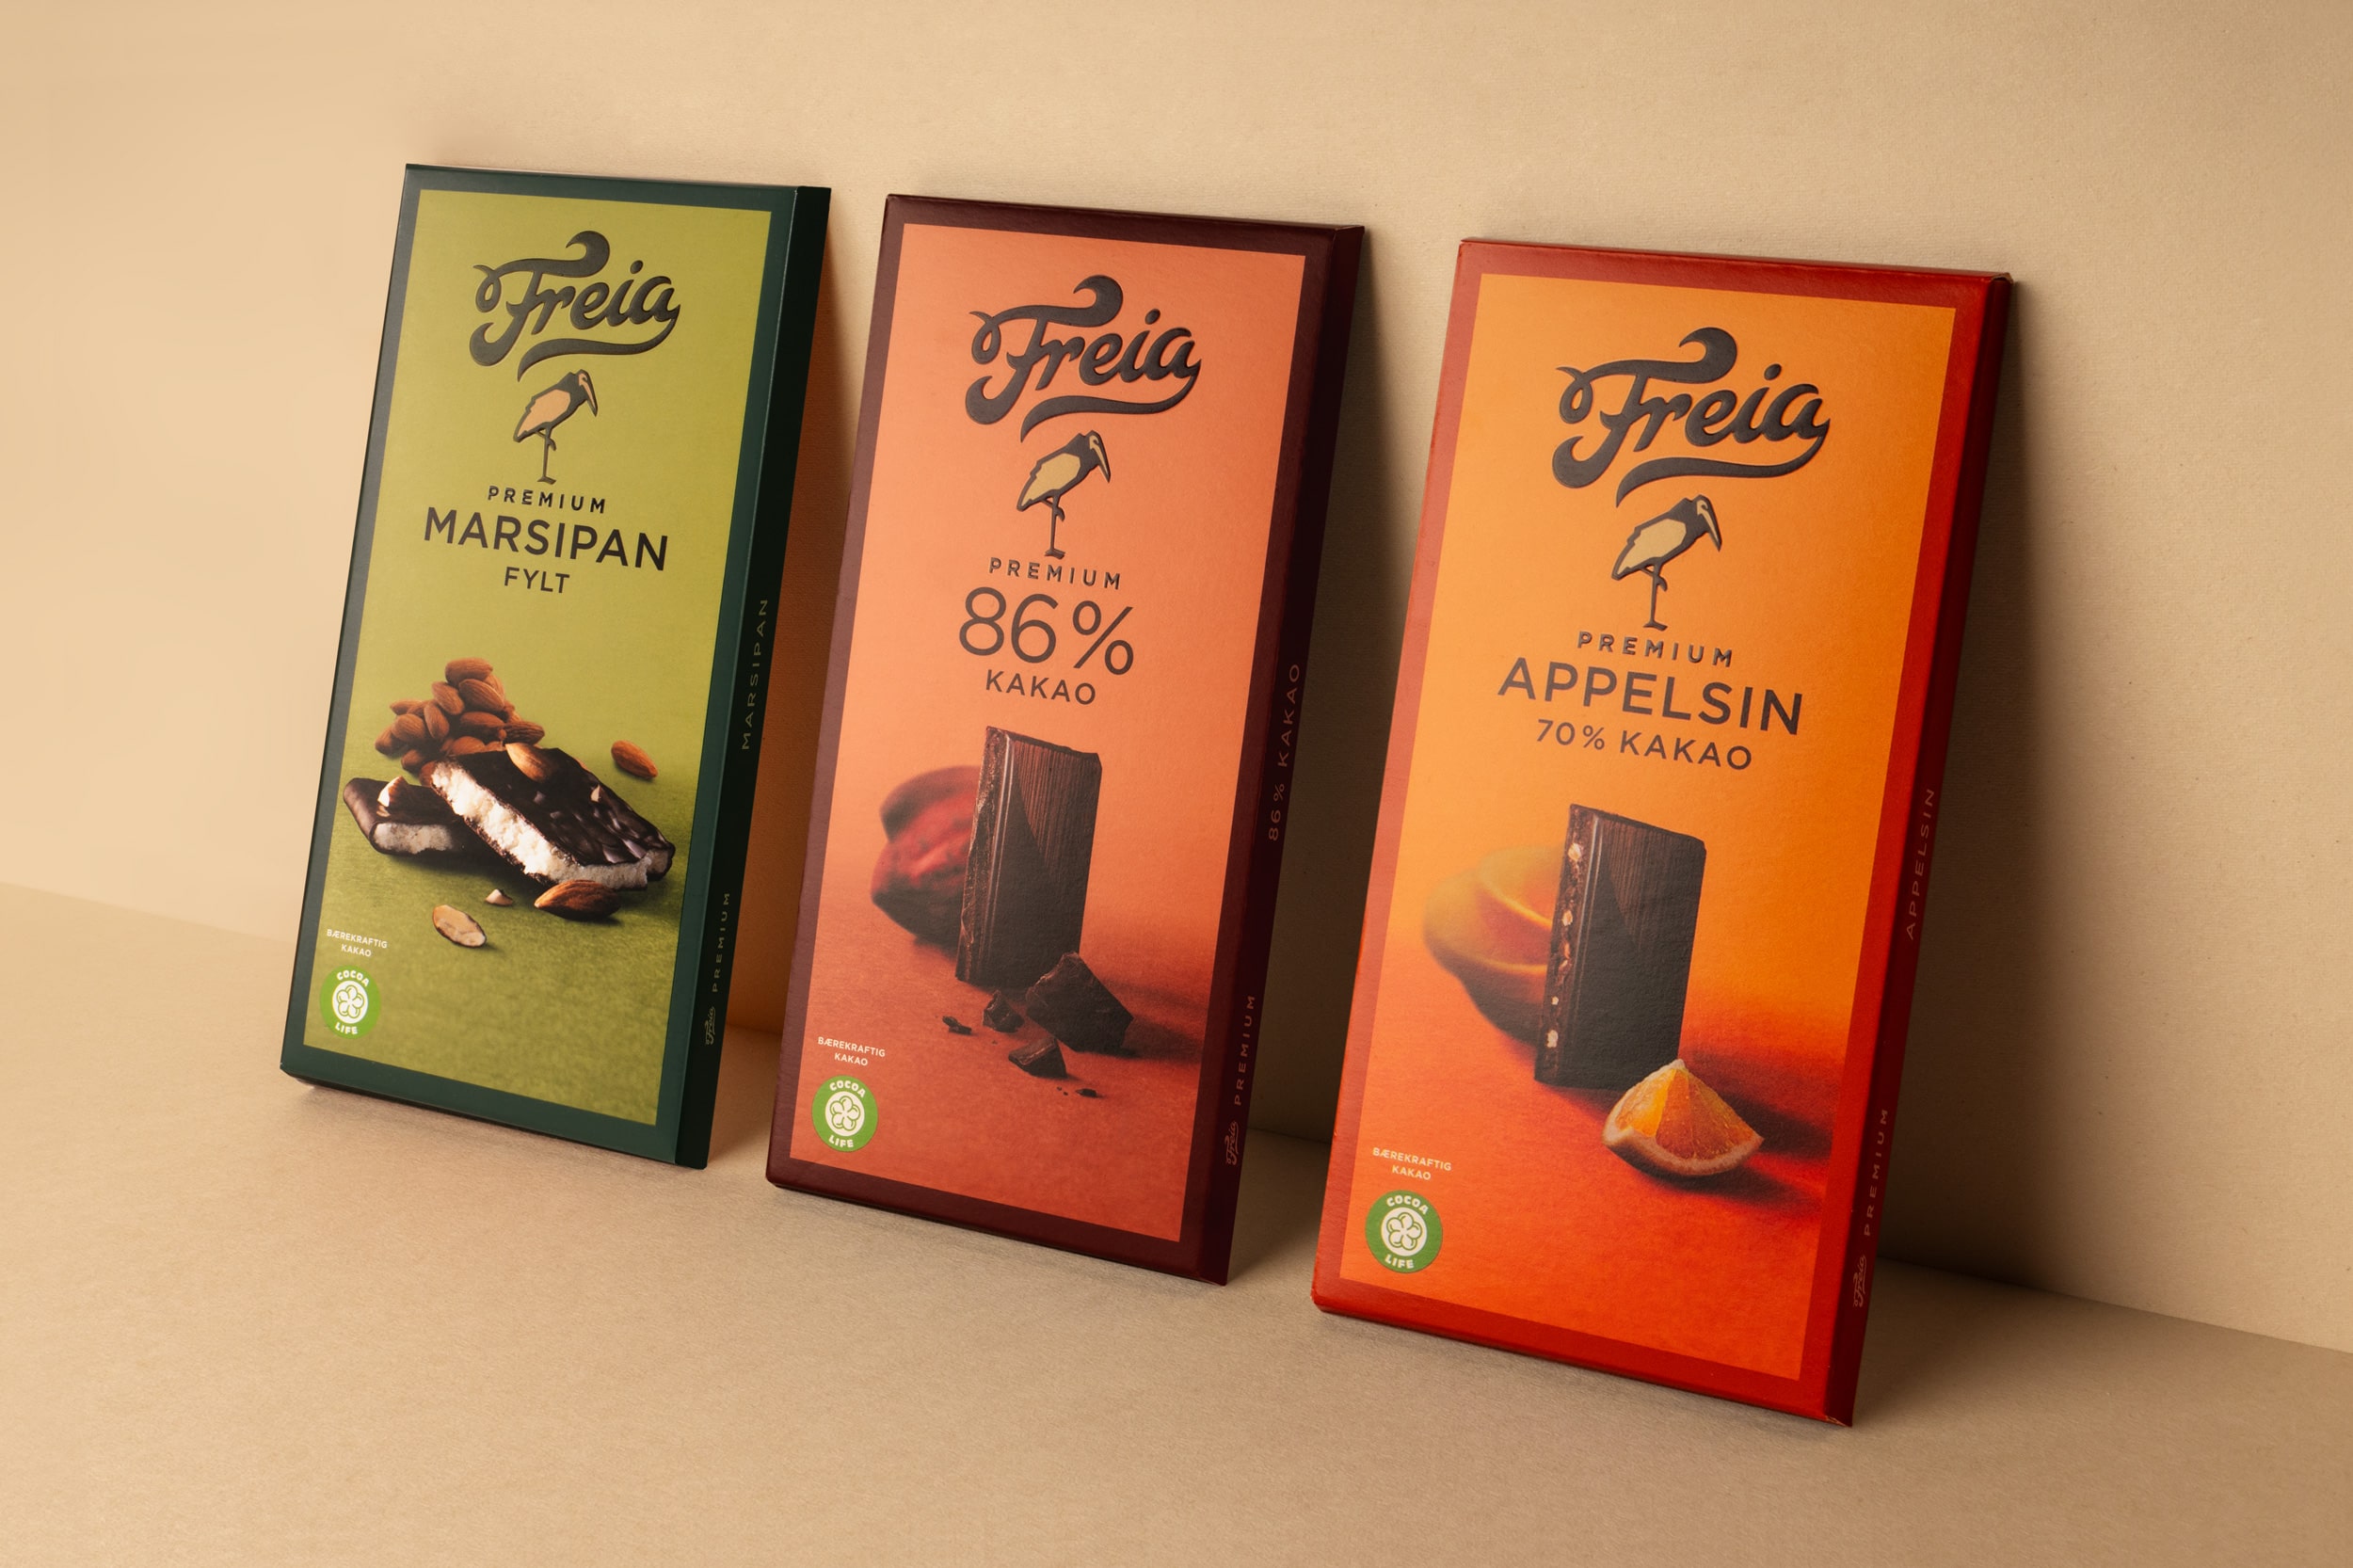 Dinamo Redefines Heritage of Freia’s Premium Chocolate Series to give a Modern Design Twist with Iconic Stork